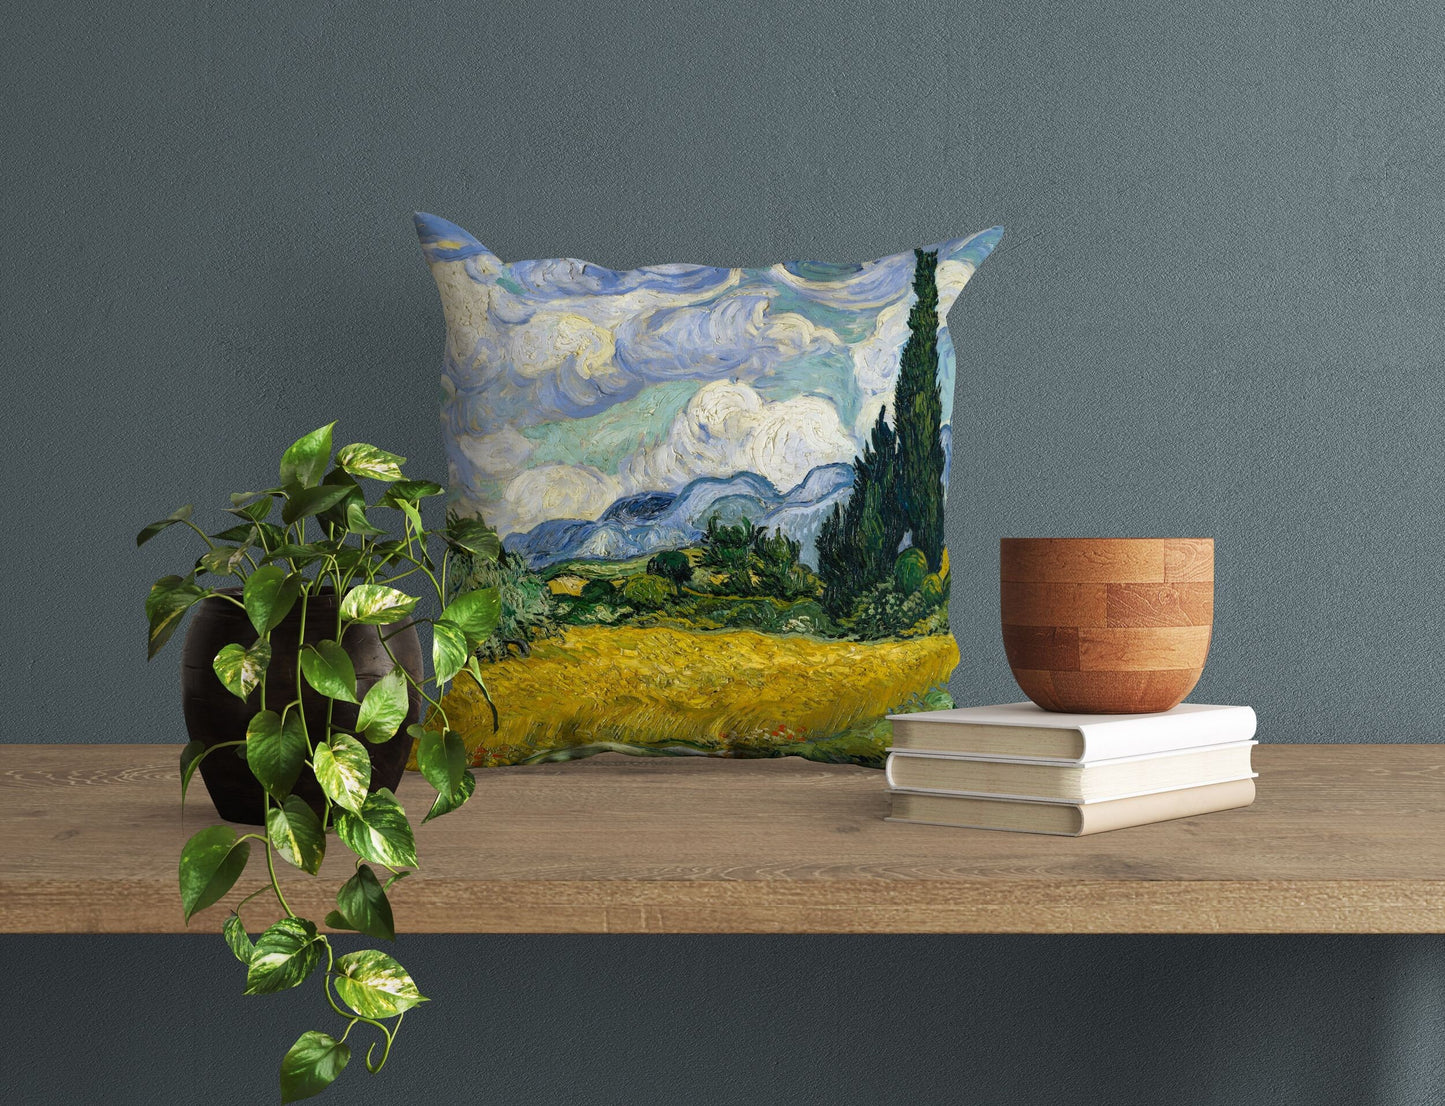 Vincent Van Gogh Wheat Field with Cypresses Pillow Case, Abstract Pillow, Soft Pillow Cases, 18 X 18 Pillow Covers, Housewarming Gift